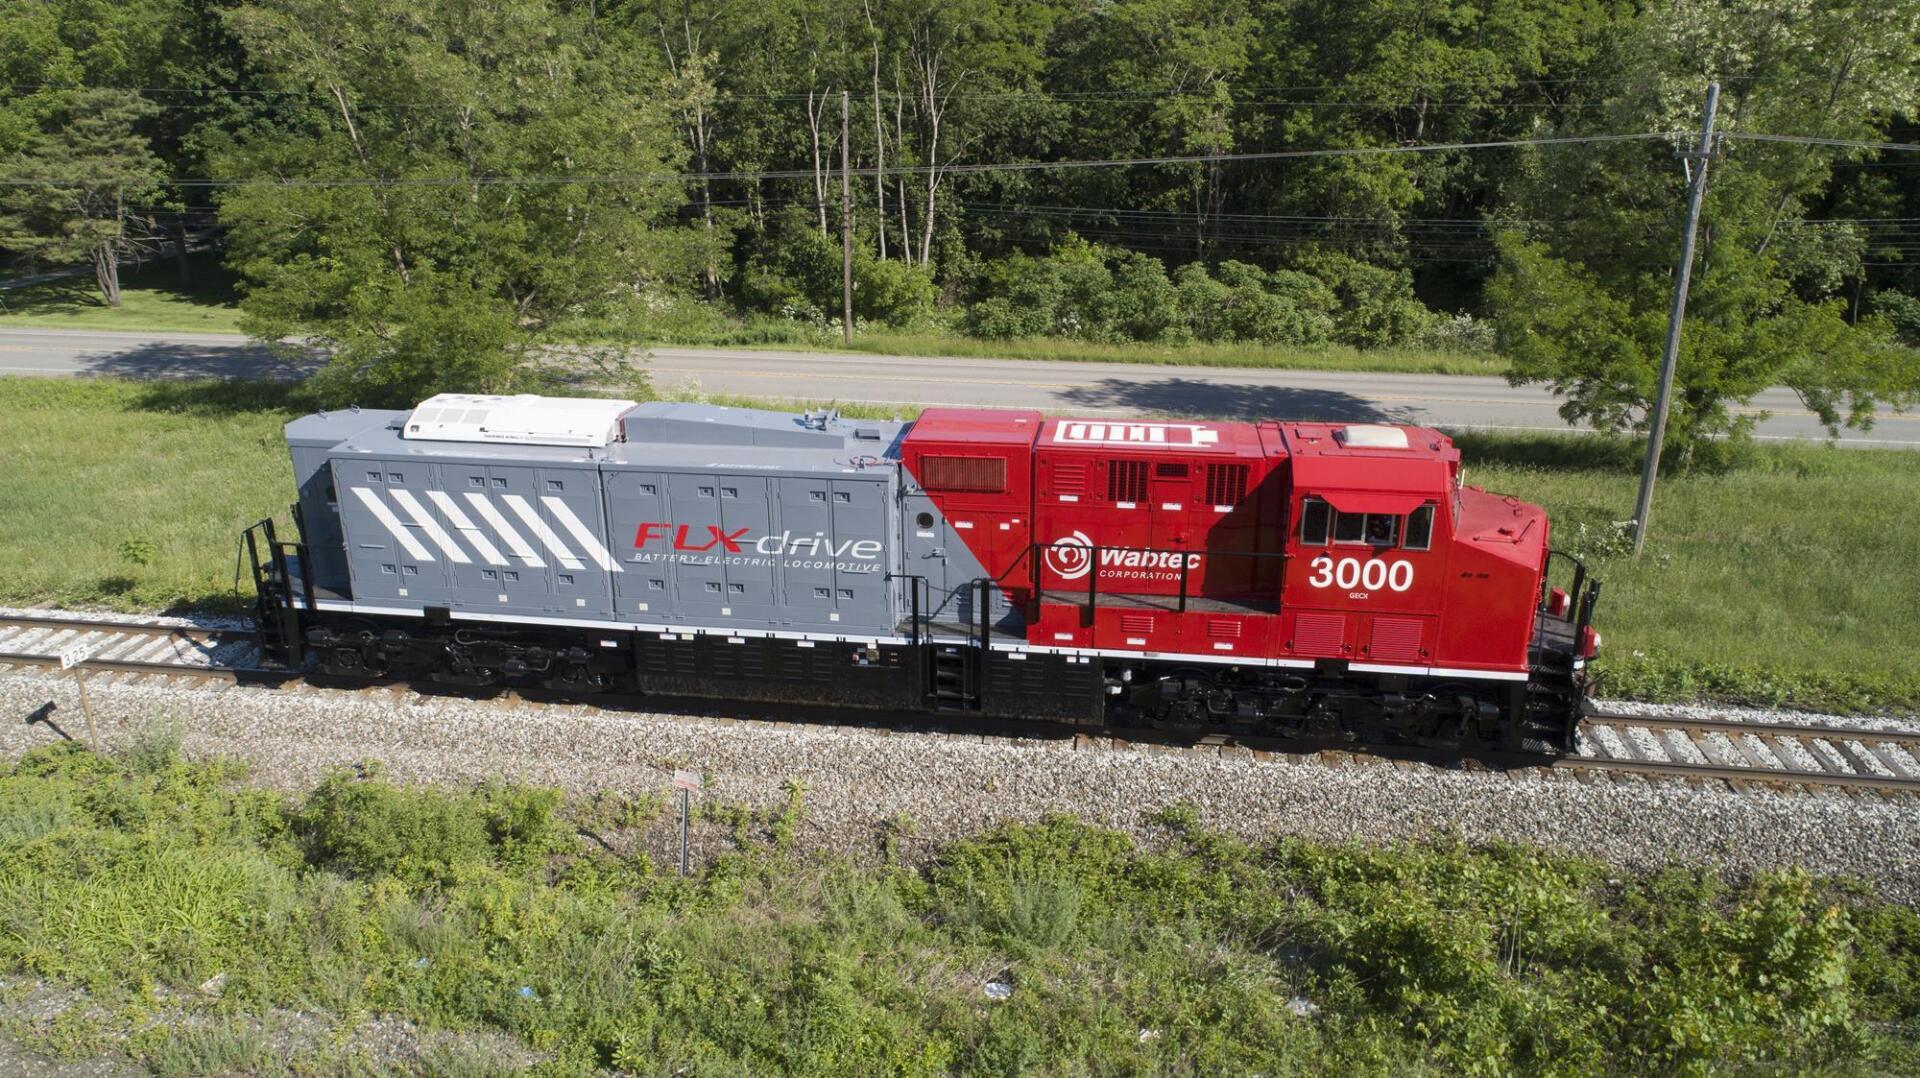 First battery-electric freight train: The Wabtec Corporation sets world record